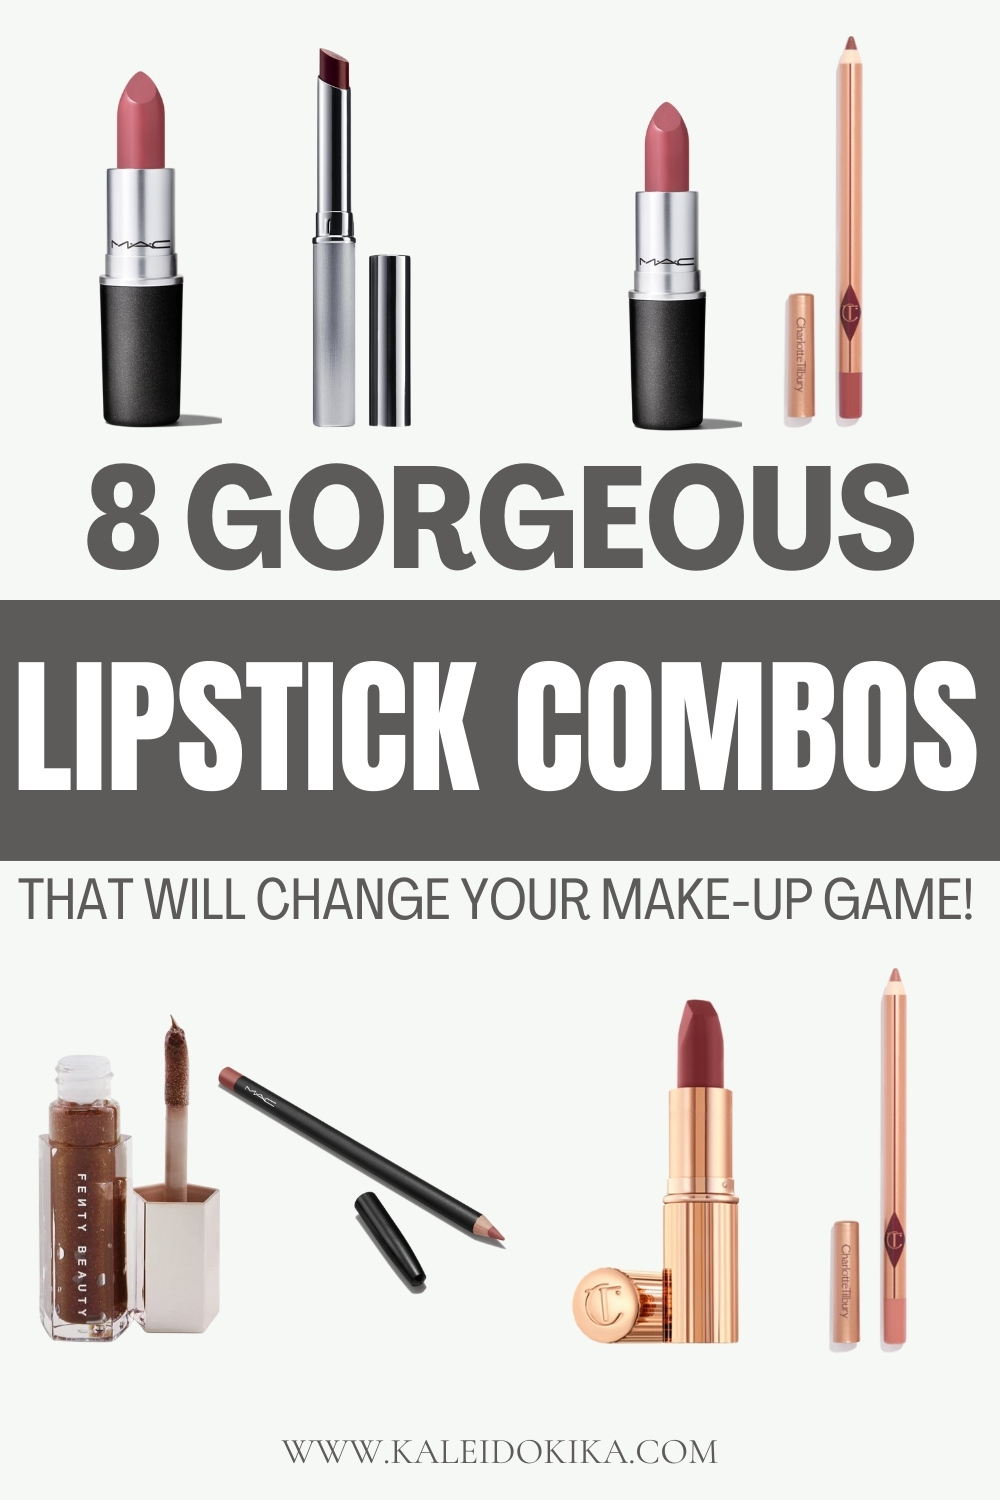 Image for a blog post talking about 8 gorgeous lipstick combos